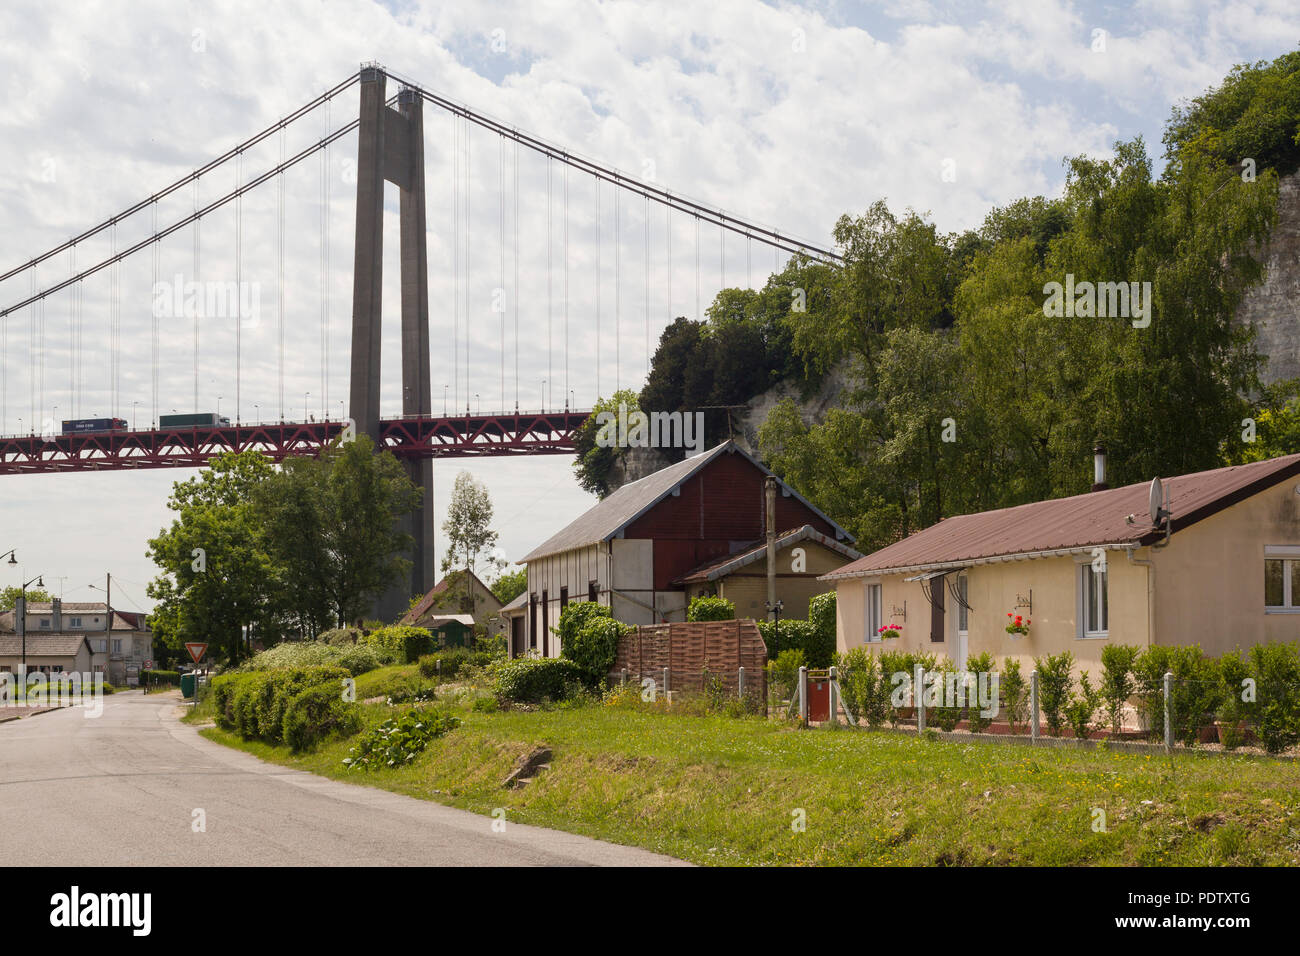 Southern pile of the Tancarville bridge, a suspension bridge over the Seine  river in the outskirts of Le Havre, France Stock Photo - Alamy